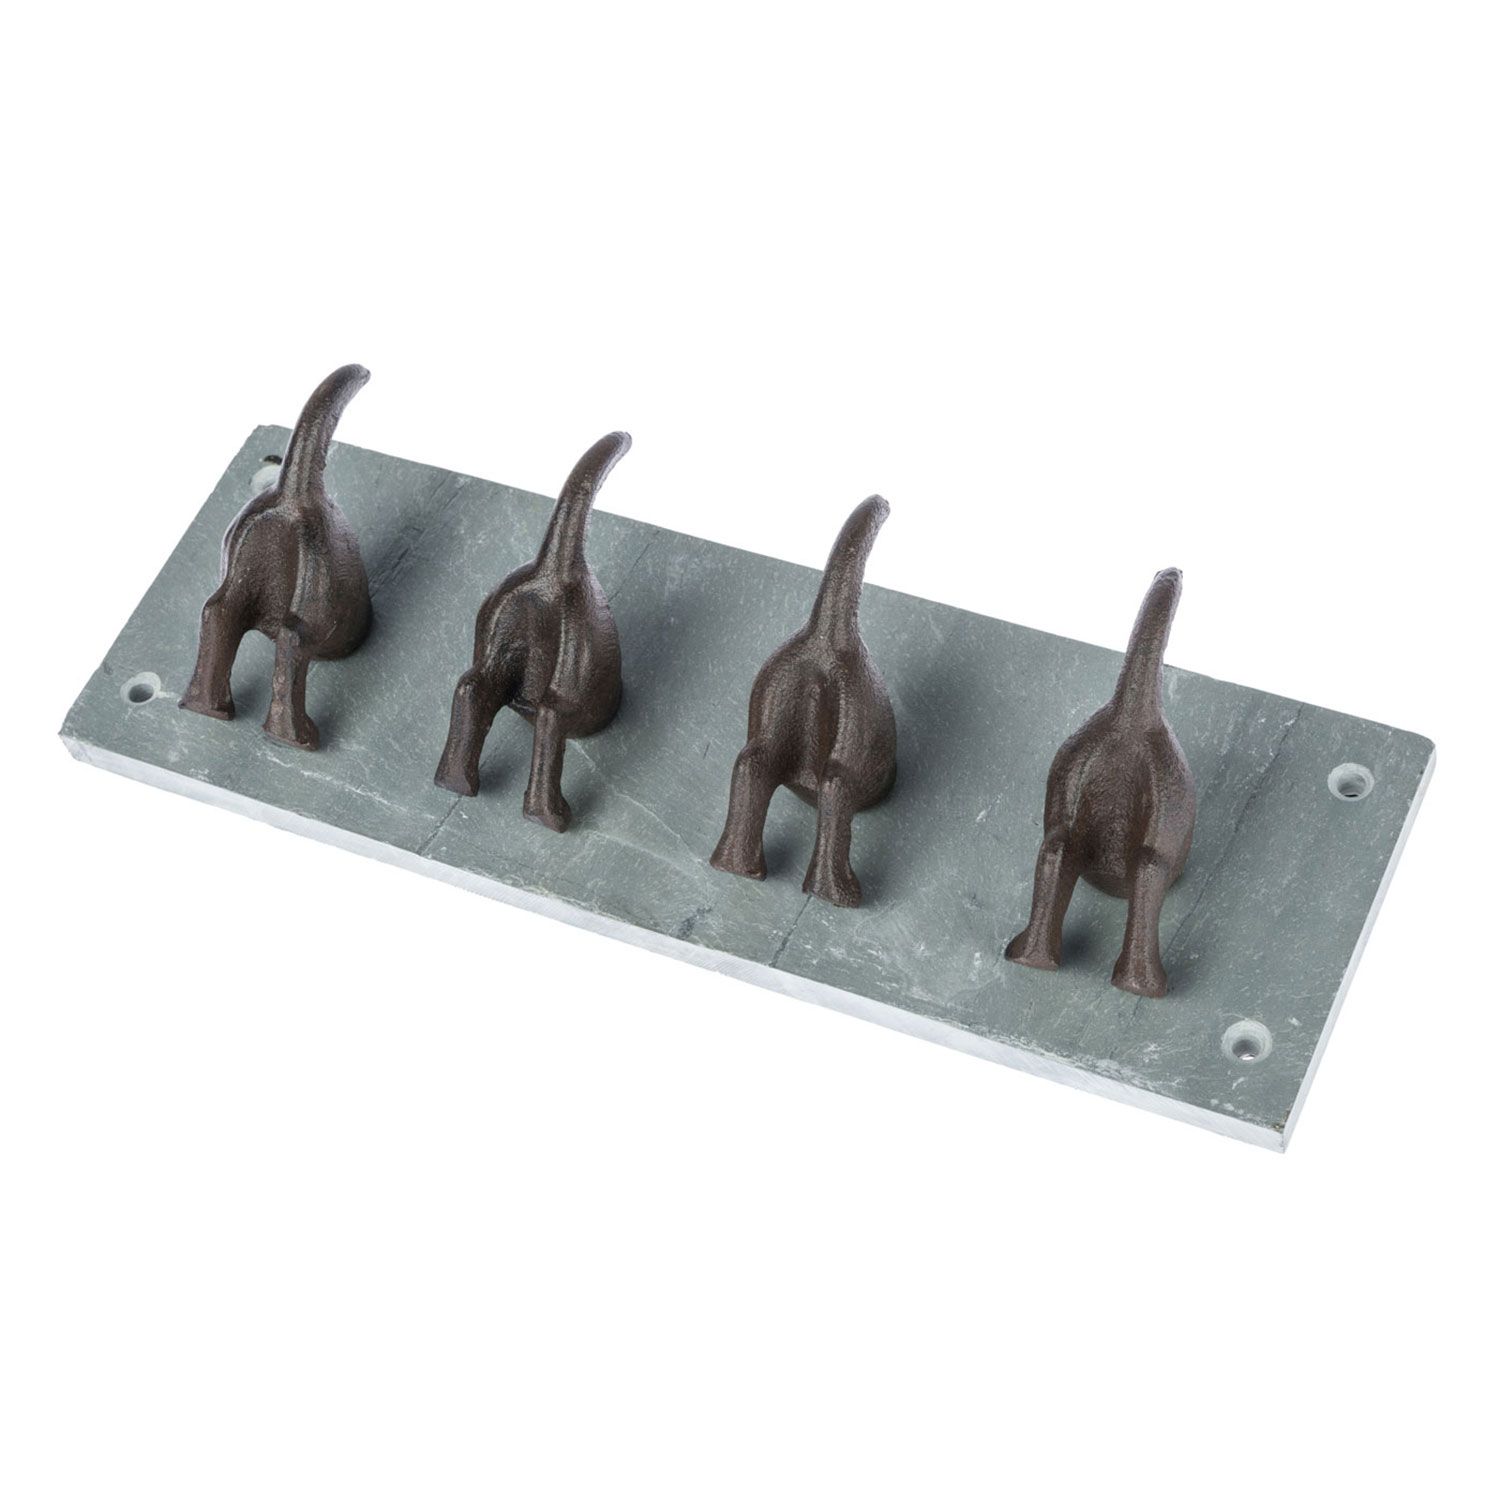 Details about   Metal Wall Mounted Dog Coat Hooks Lot of 4 Pieces Figurine us 